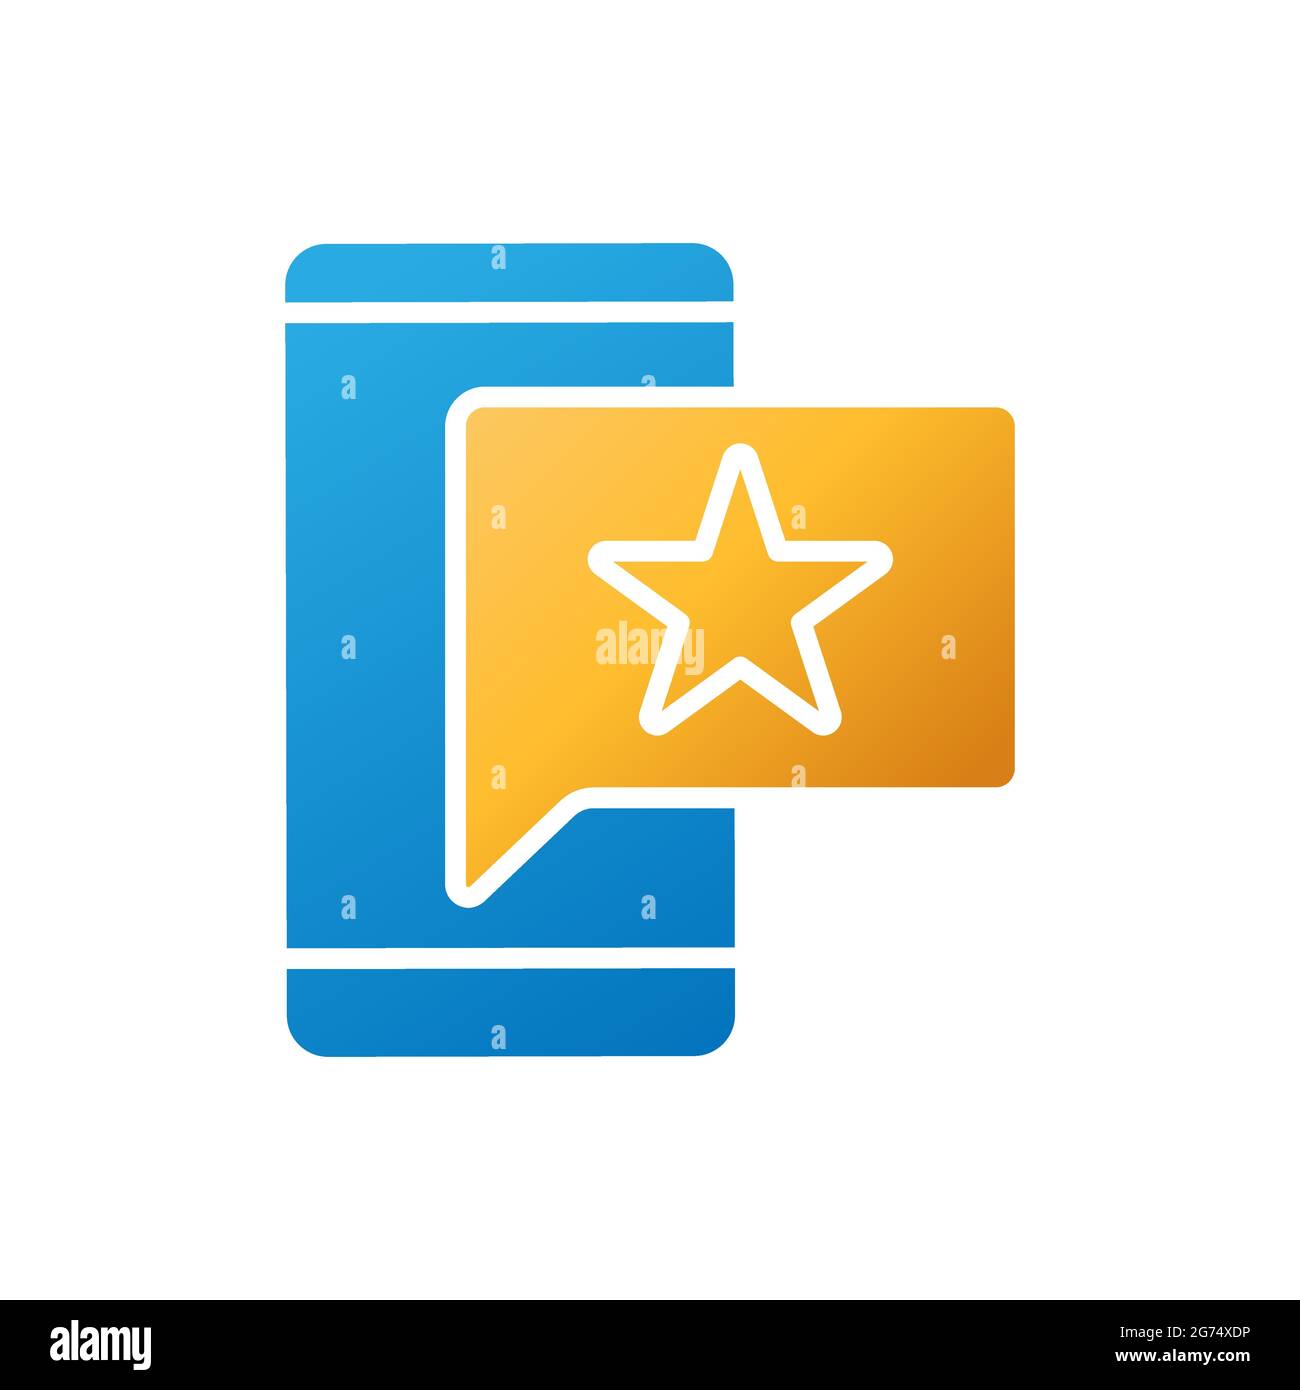 Rating, Review, or feedback icon vector illustration. Customer rating icon vector design template. Customer Review Feedback with Star vector icon desi Stock Vector